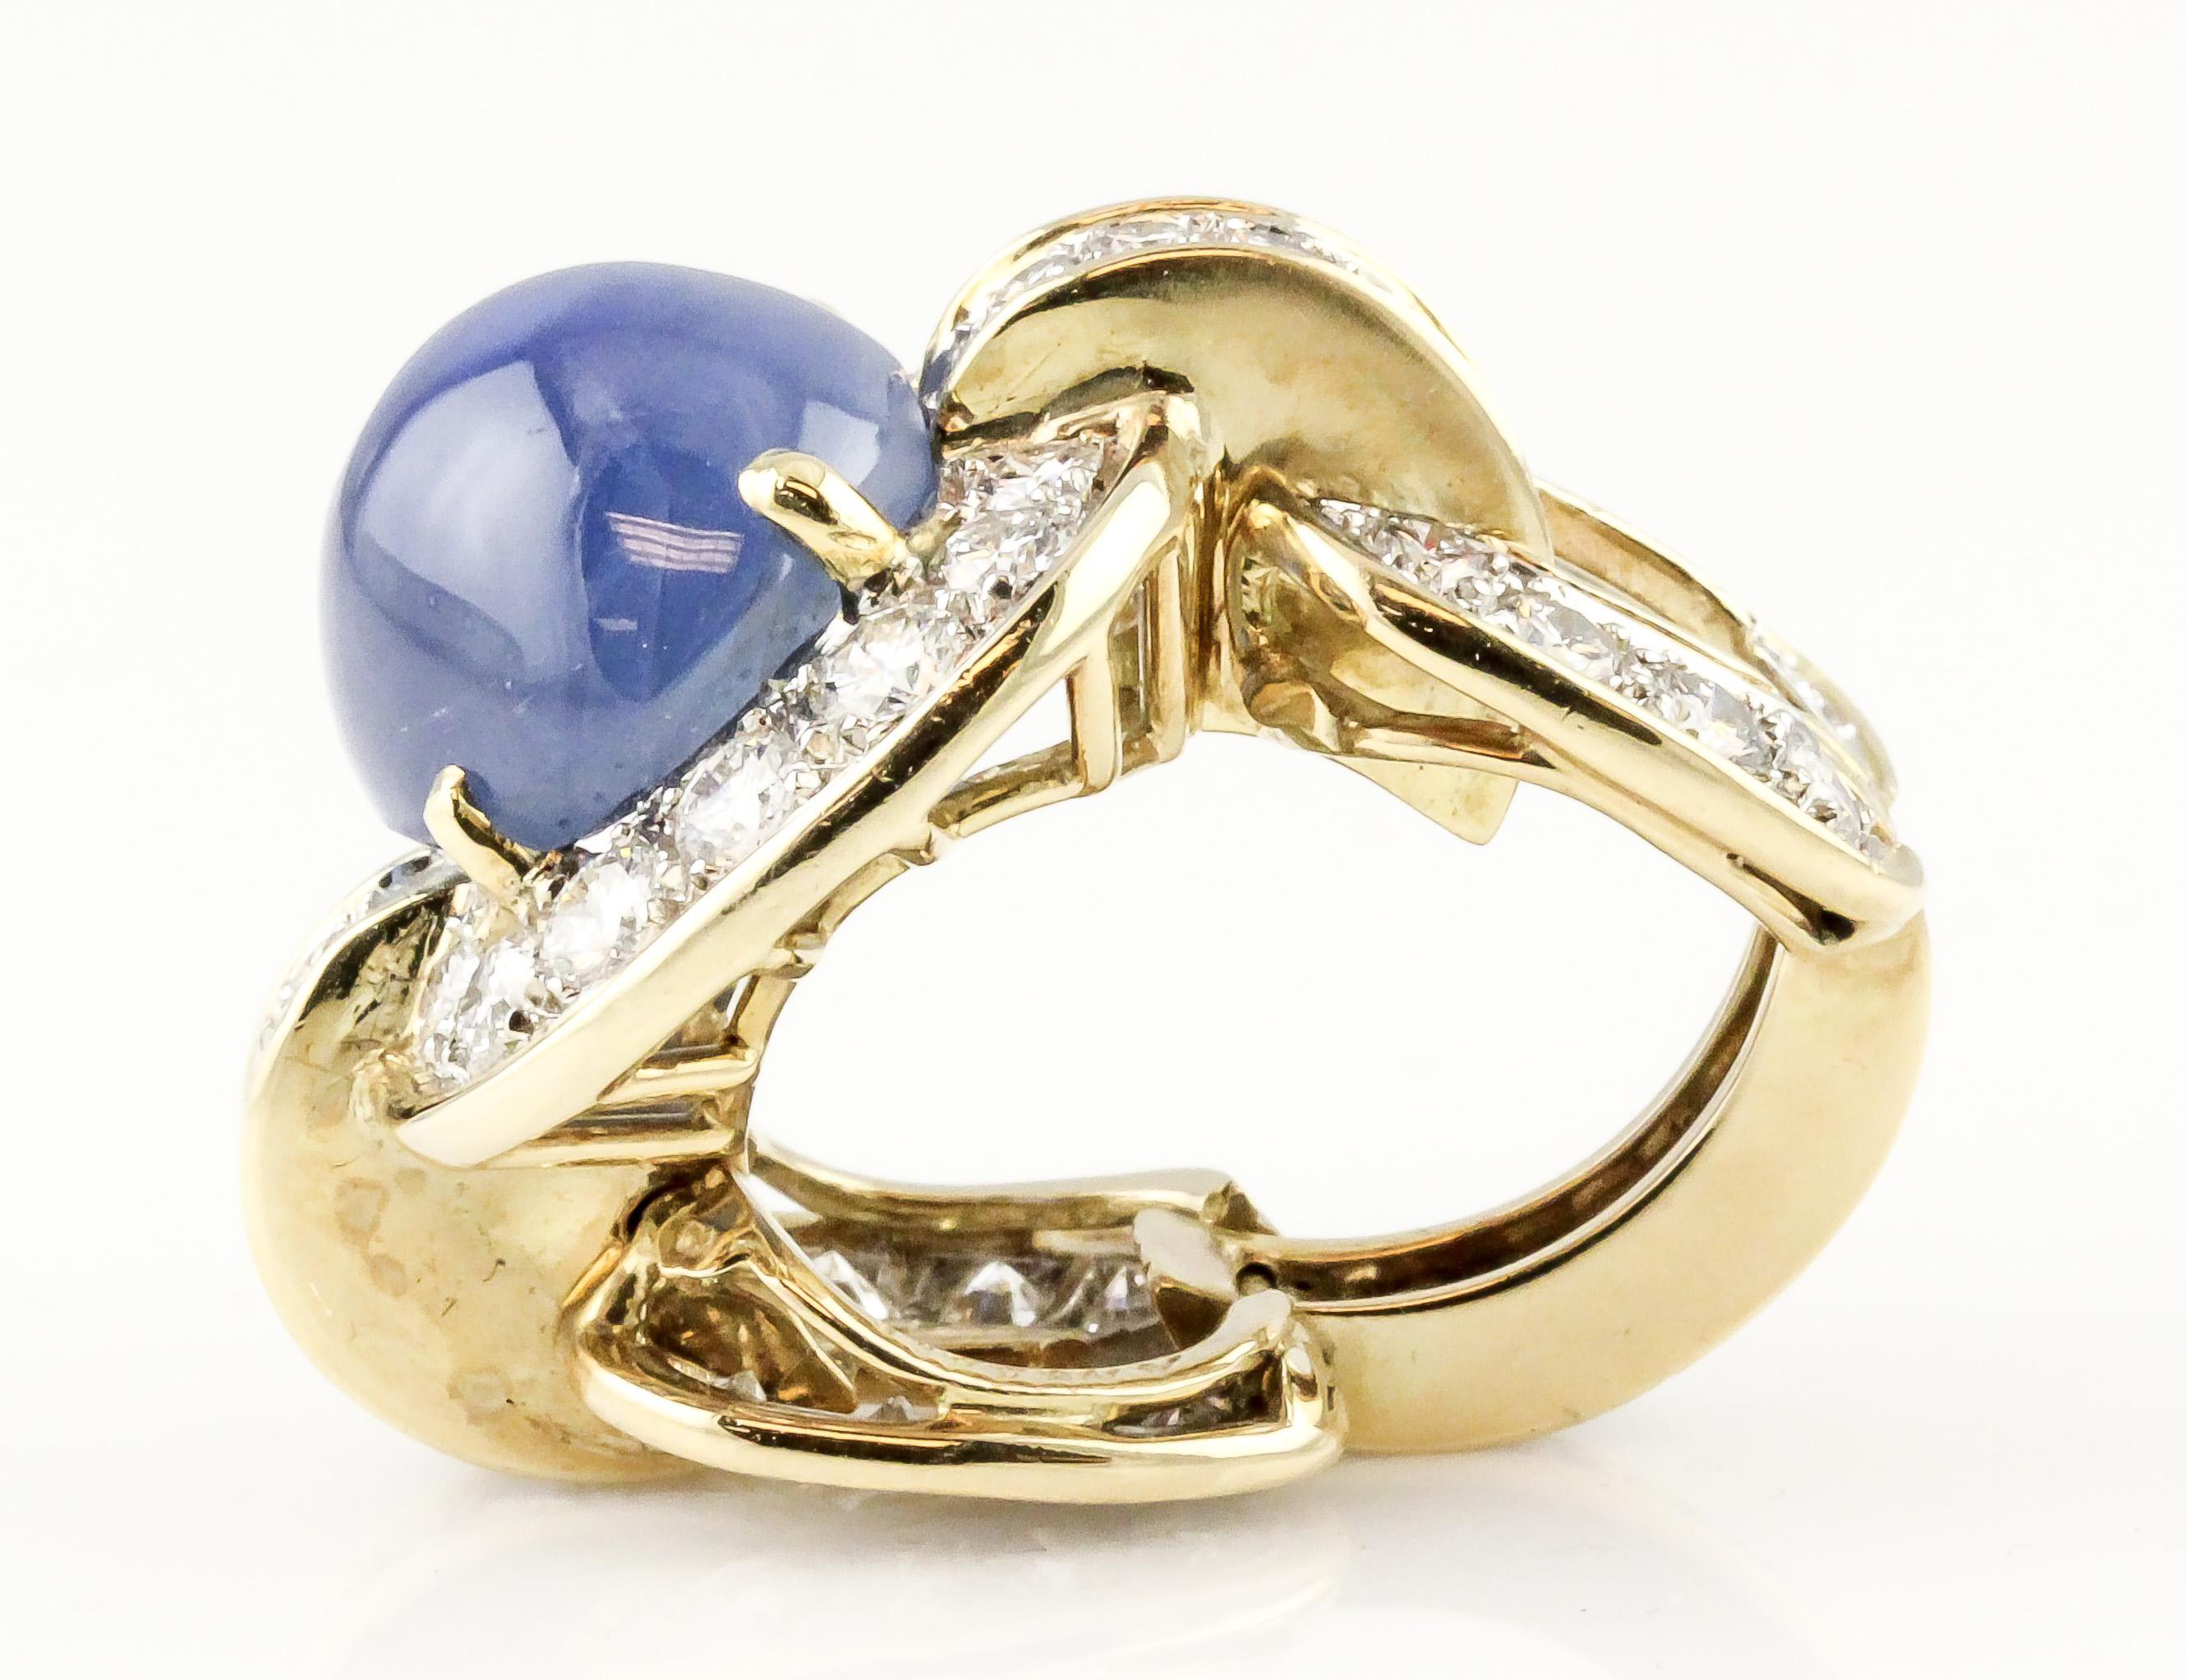 Tiffany & Co. Donald Claflin Sapphire Diamond 18k Gold Platinum Ring In Good Condition For Sale In Bellmore, NY